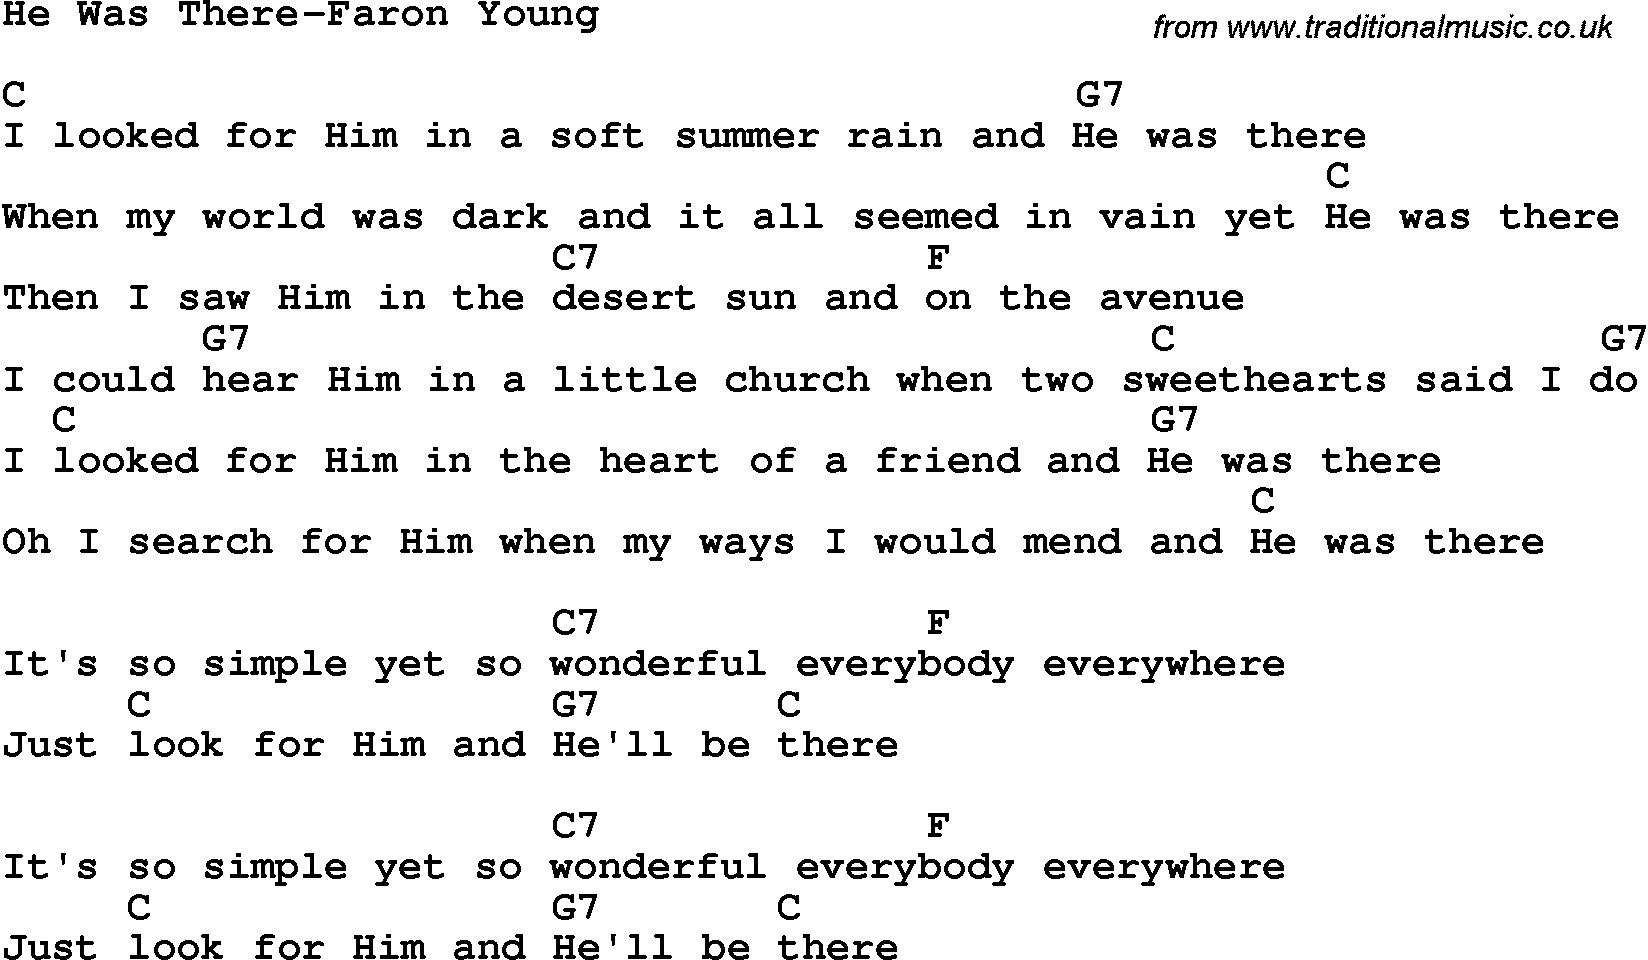 Country, Southern and Bluegrass Gospel Song He Was There-Faron Young lyrics and chords